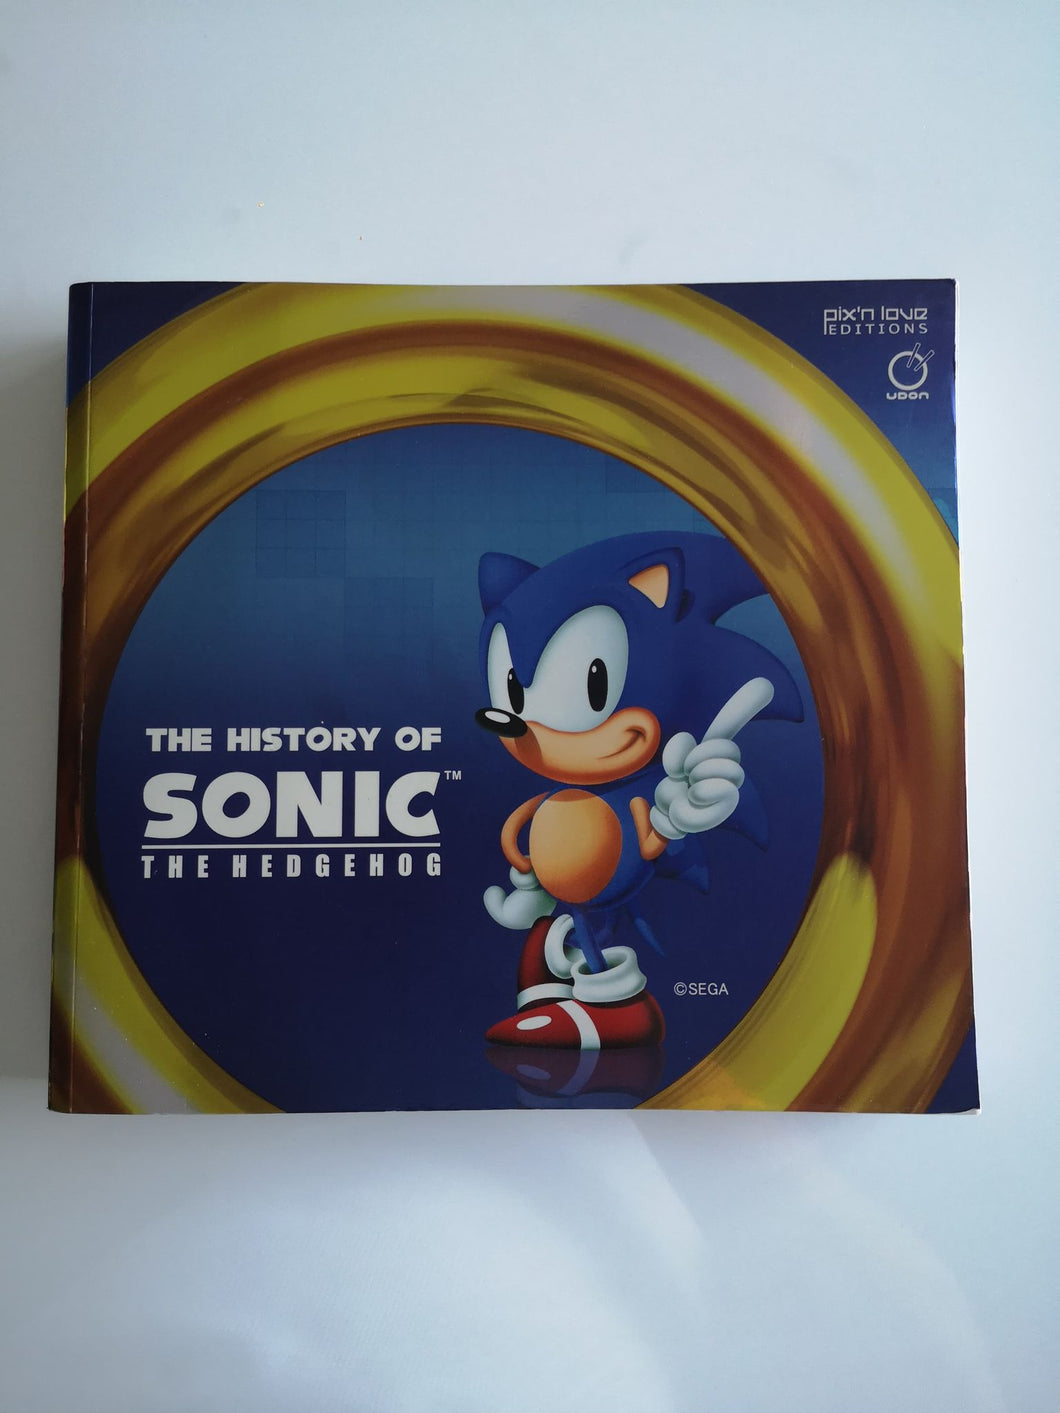 The History of Sonic the Hedgehog (Pix 'n Love Editions) - Strategy Guide